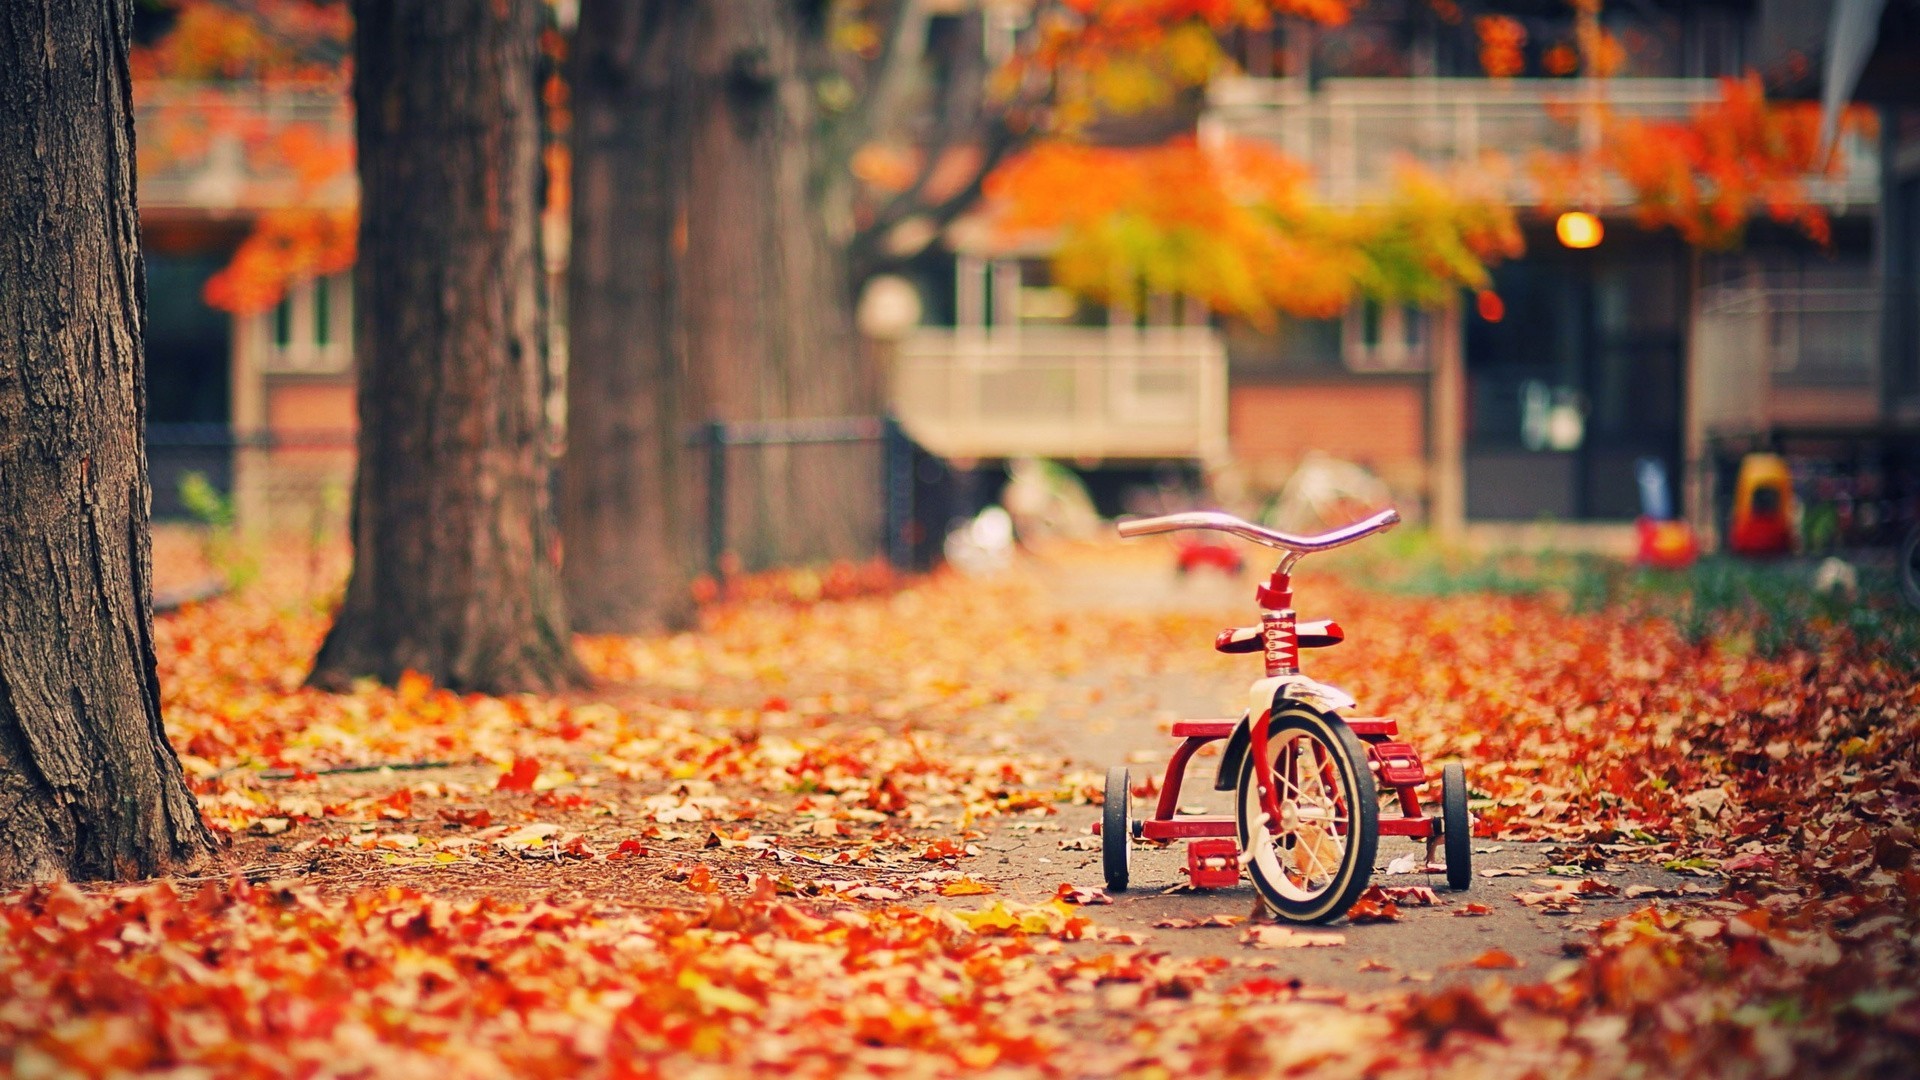 1920x1080 Children's bicycle on the fall foliage